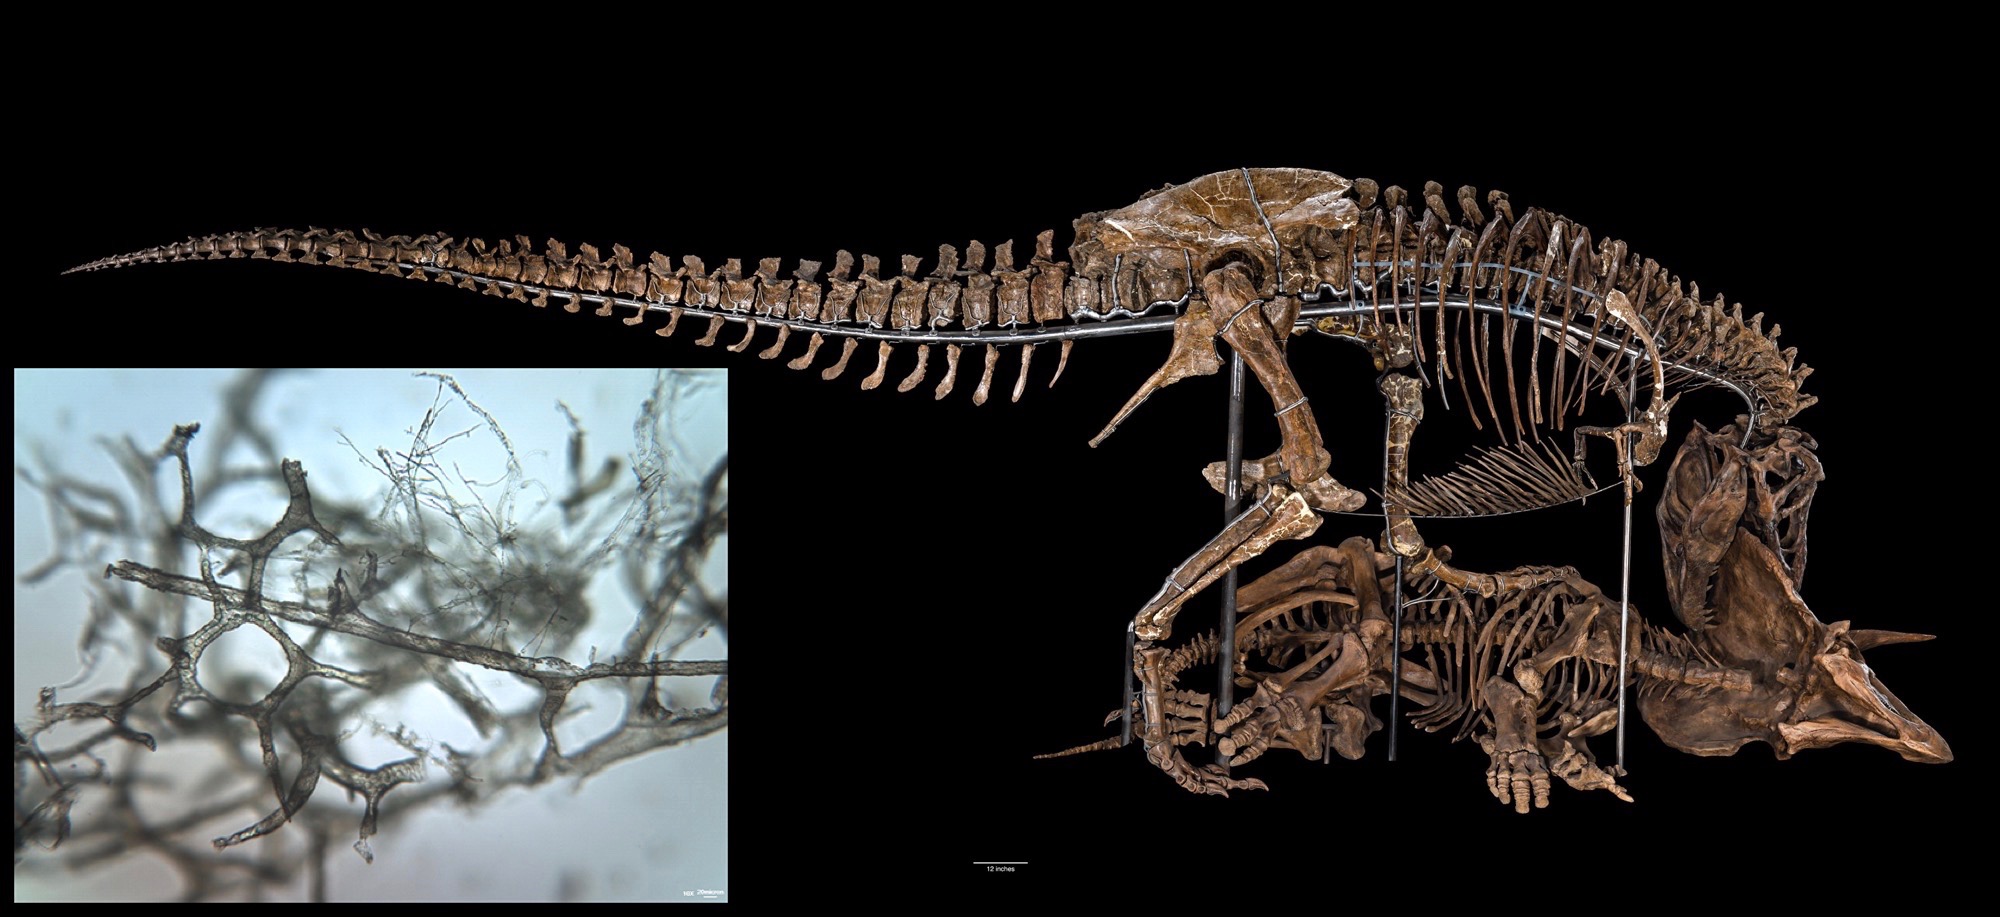 Photo of a T. rex skeleton, posed mid-attack on a triceratops skeleton, on black background; inset shows visible-light microscopy image of T. rex vascular structure.